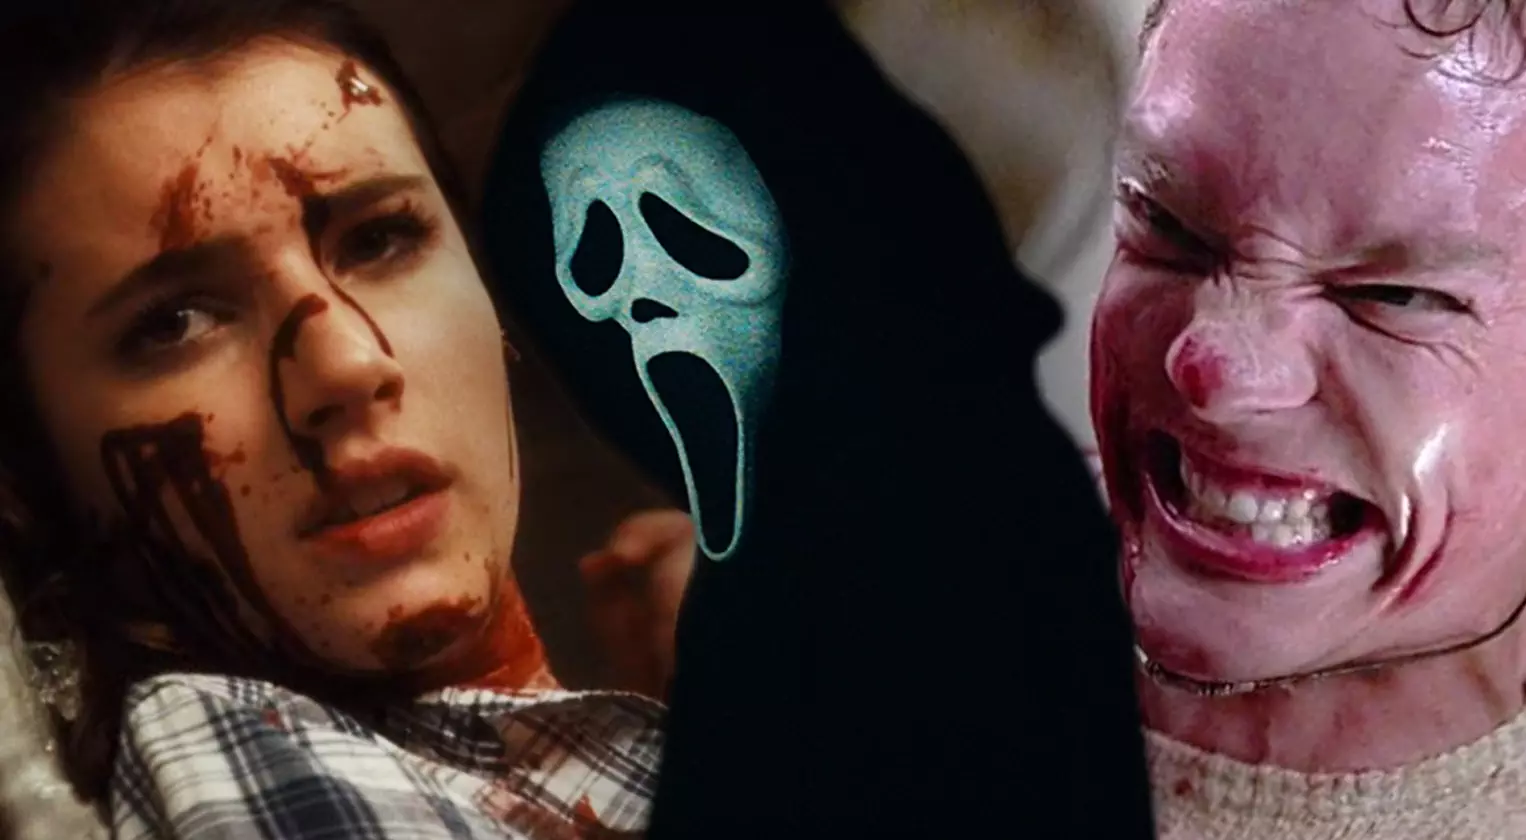 Scream's Varying Killers Make Ghostface the Most Unique Slasher